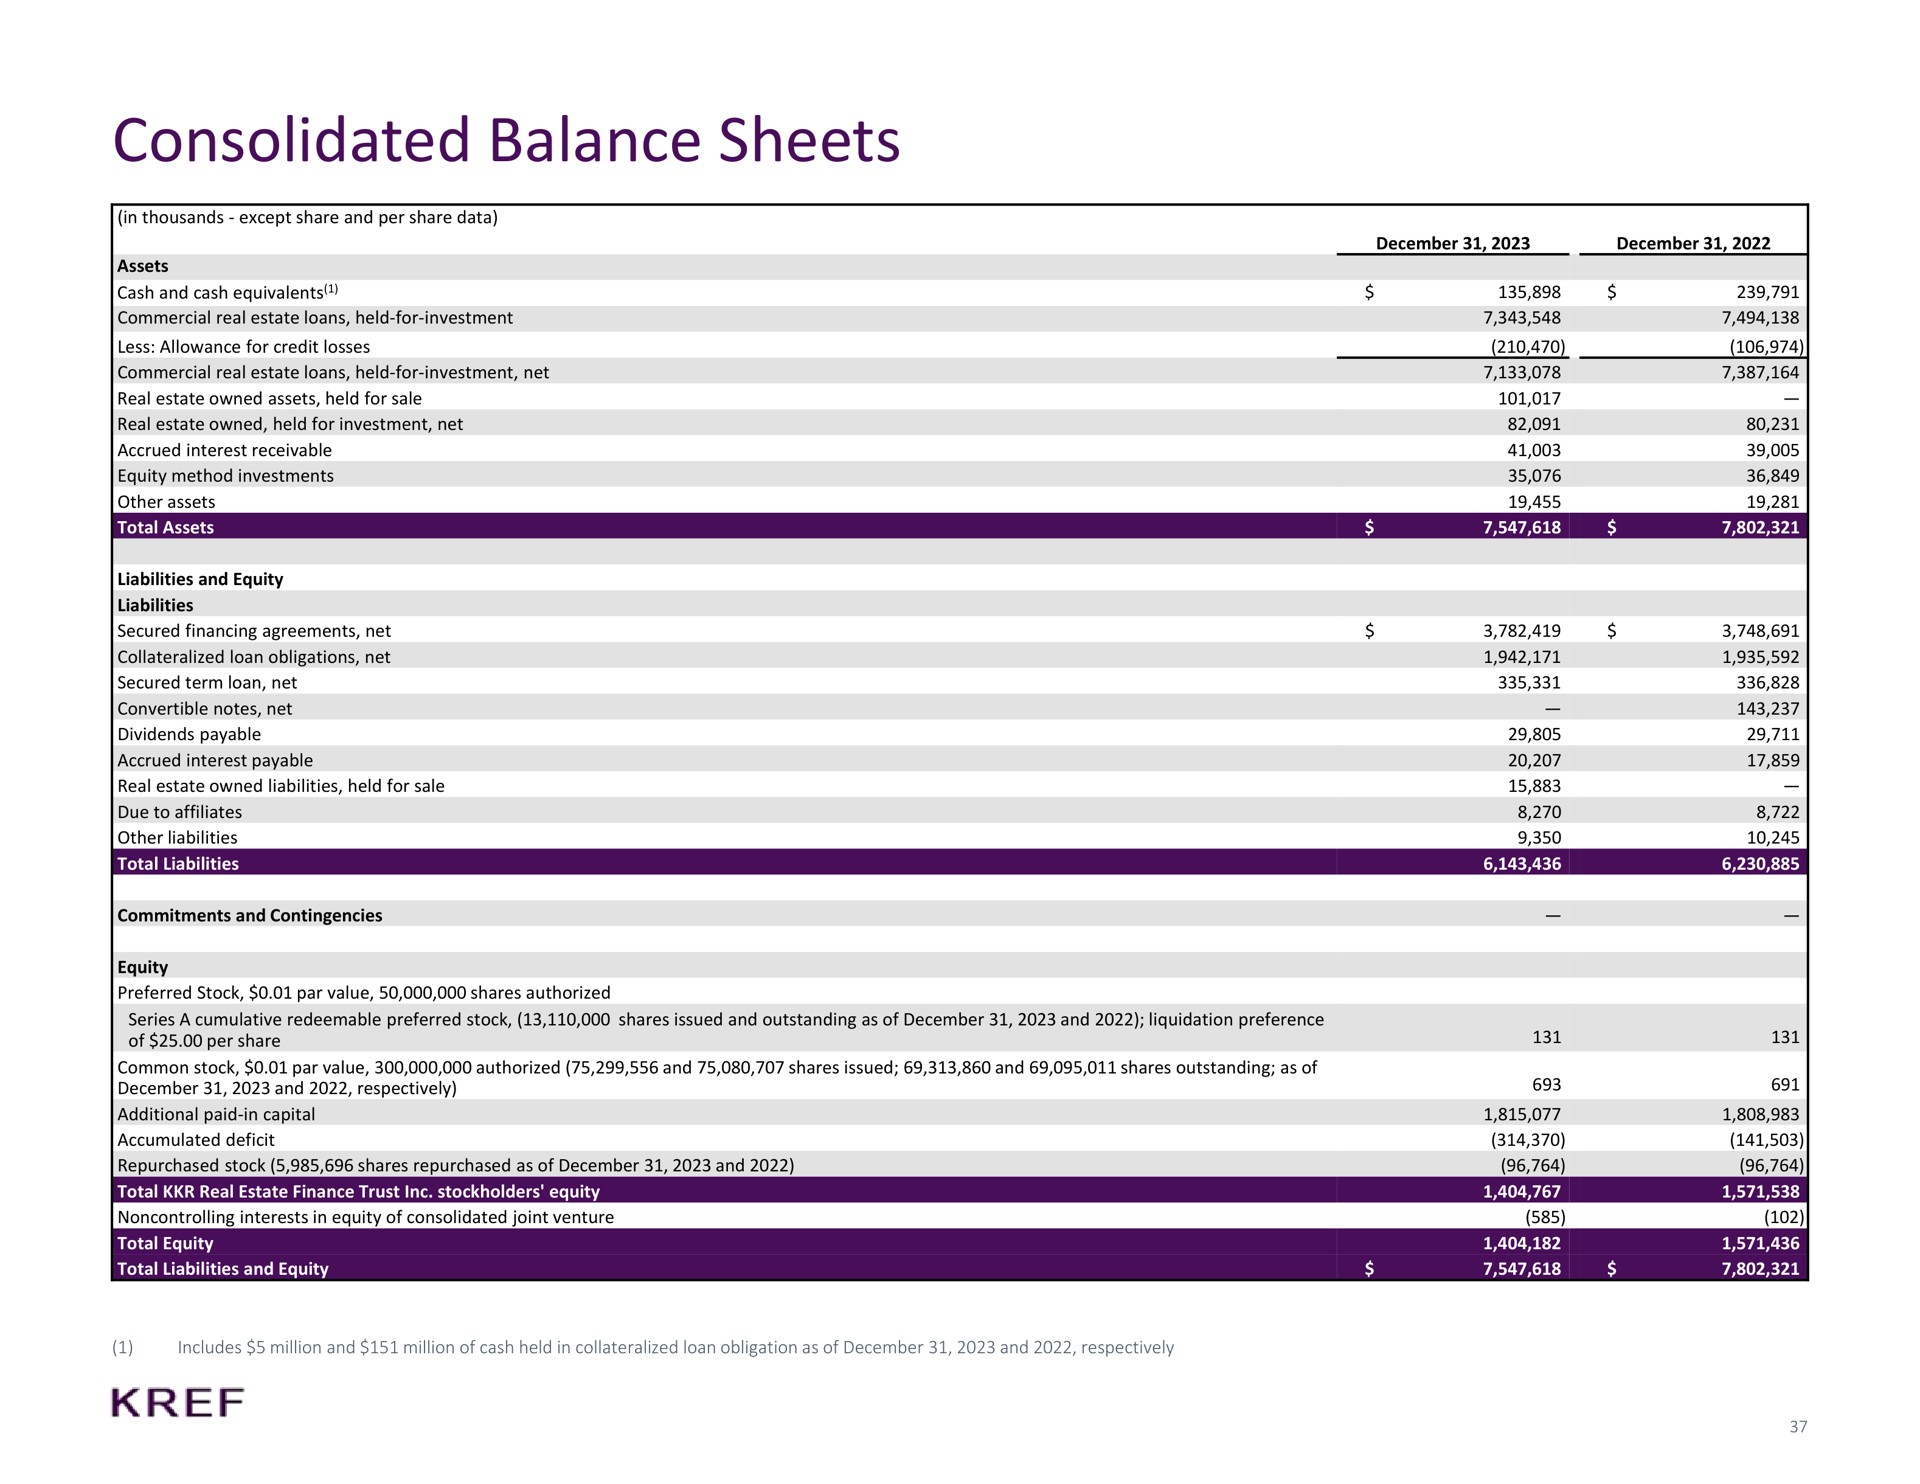 consolidated balance sheets | KKR Real Estate Finance Trust